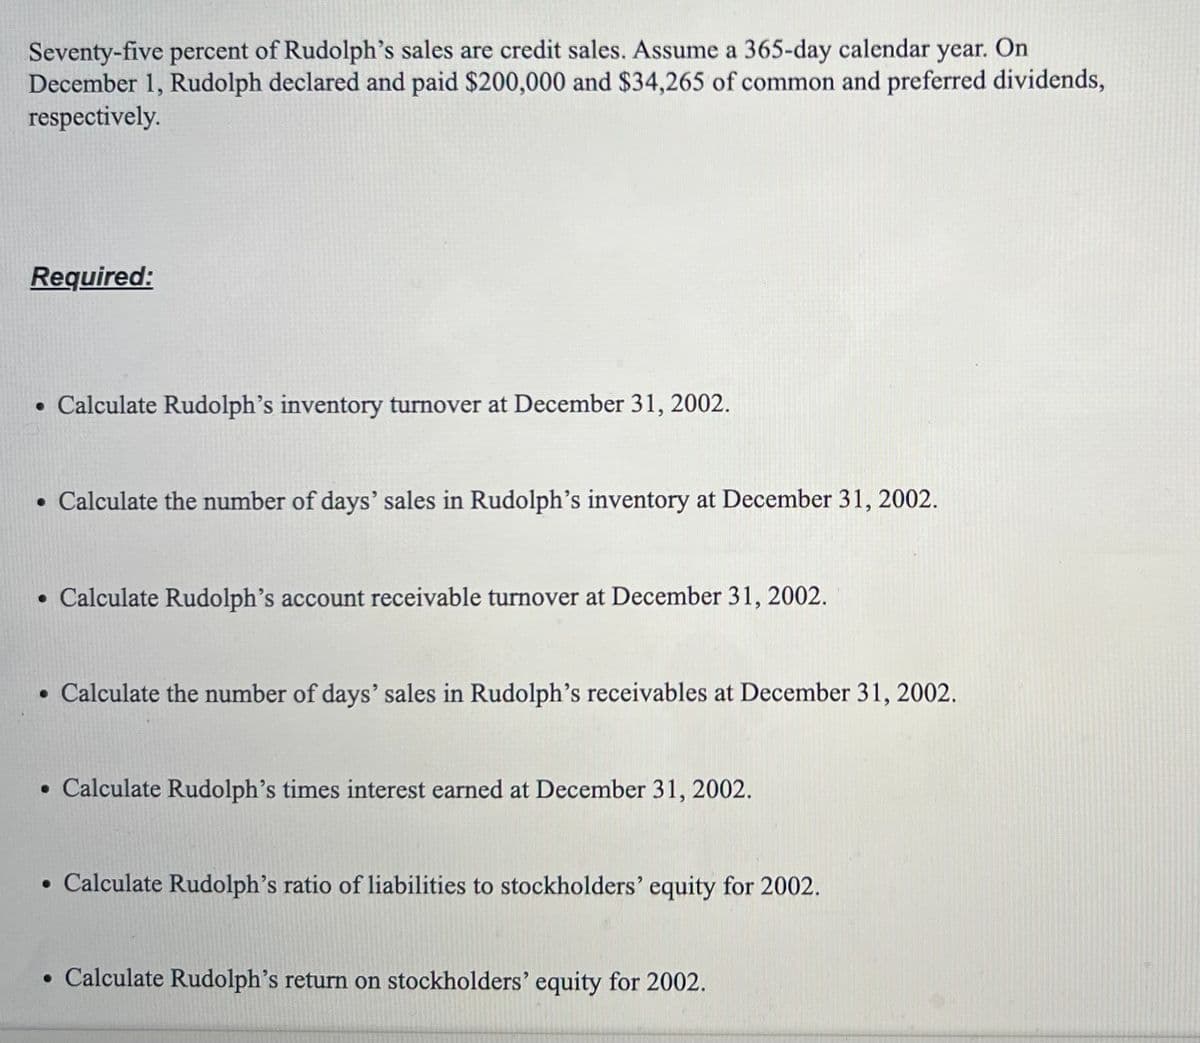 Seventy-five percent of Rudolph's sales are credit sales. Assume a 365-day calendar year. On
December 1, Rudolph declared and paid $200,000 and $34,265 of common and preferred dividends,
respectively.
Required:
• Calculate Rudolph's inventory turnover at December 31, 2002.
• Calculate the number of days' sales in Rudolph's inventory at December 31, 2002.
• Calculate Rudolph's account receivable turnover at December 31, 2002.
• Calculate the number of days' sales in Rudolph's receivables at December 31, 2002.
• Calculate Rudolph's times interest earned at December 31, 2002.
• Calculate Rudolph's ratio of liabilities to stockholders' equity for 2002.
• Calculate Rudolph's return on stockholders' equity for 2002.